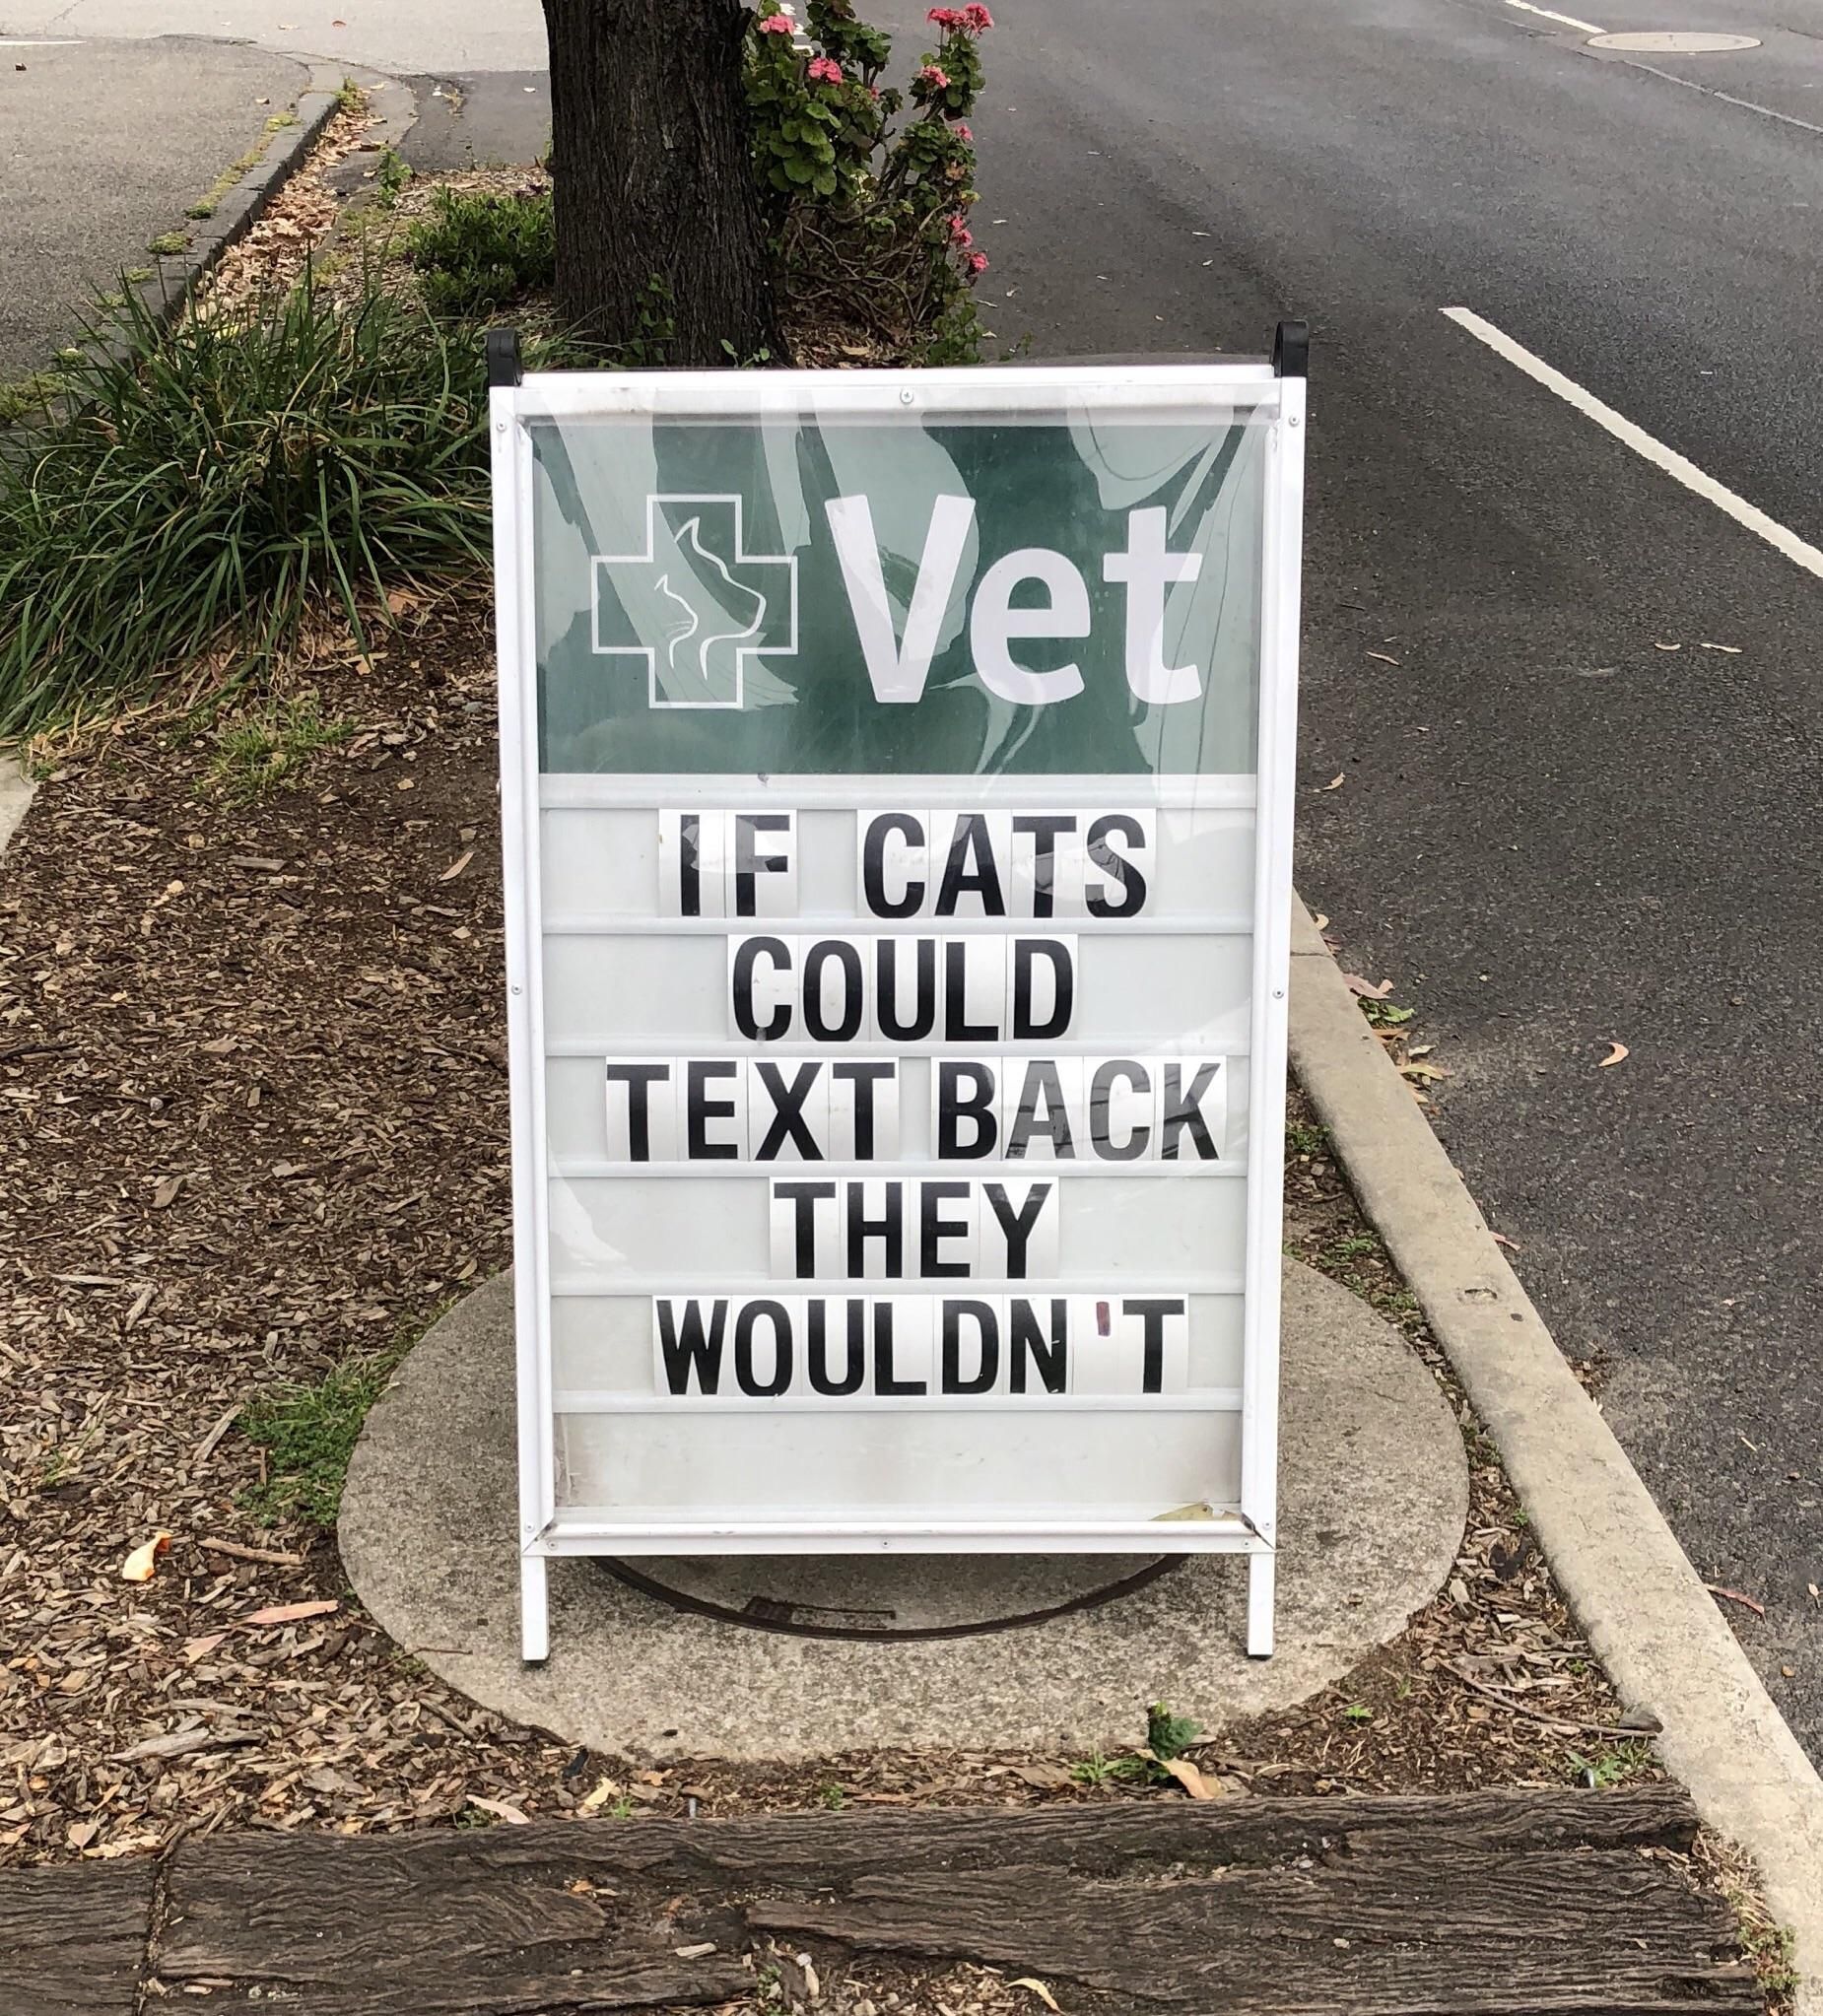 If cats could text